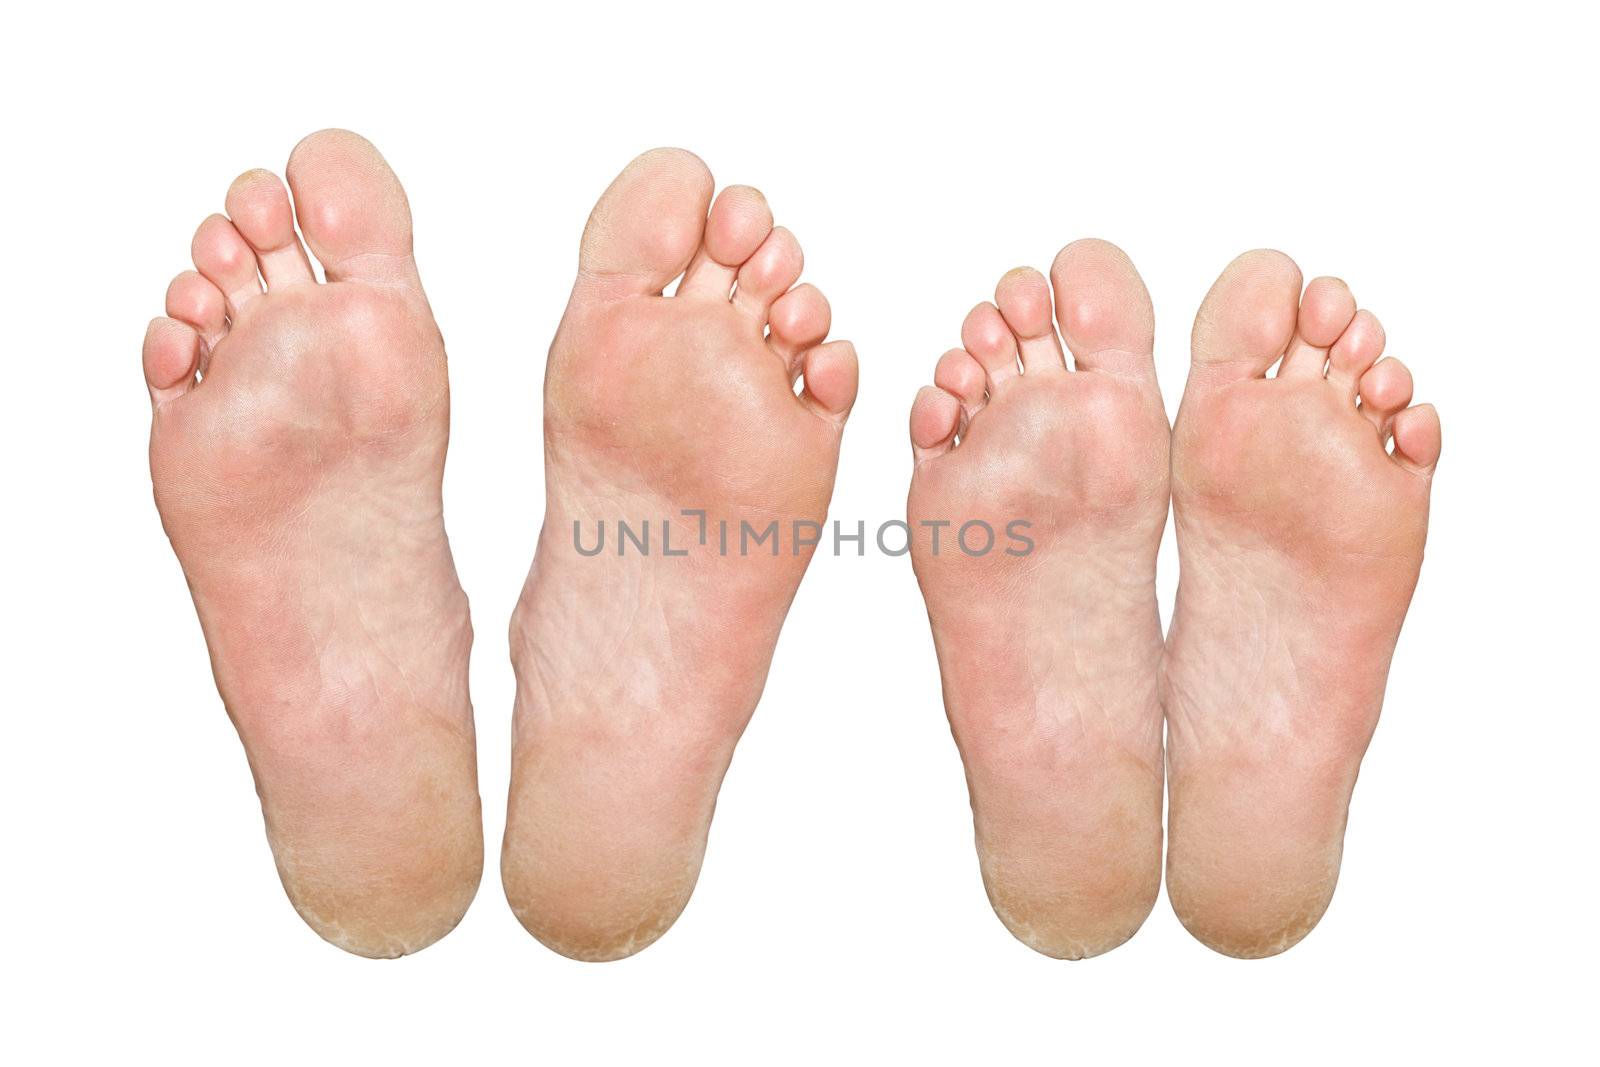 The man and woman. Caucasian feet. Isolated over white background